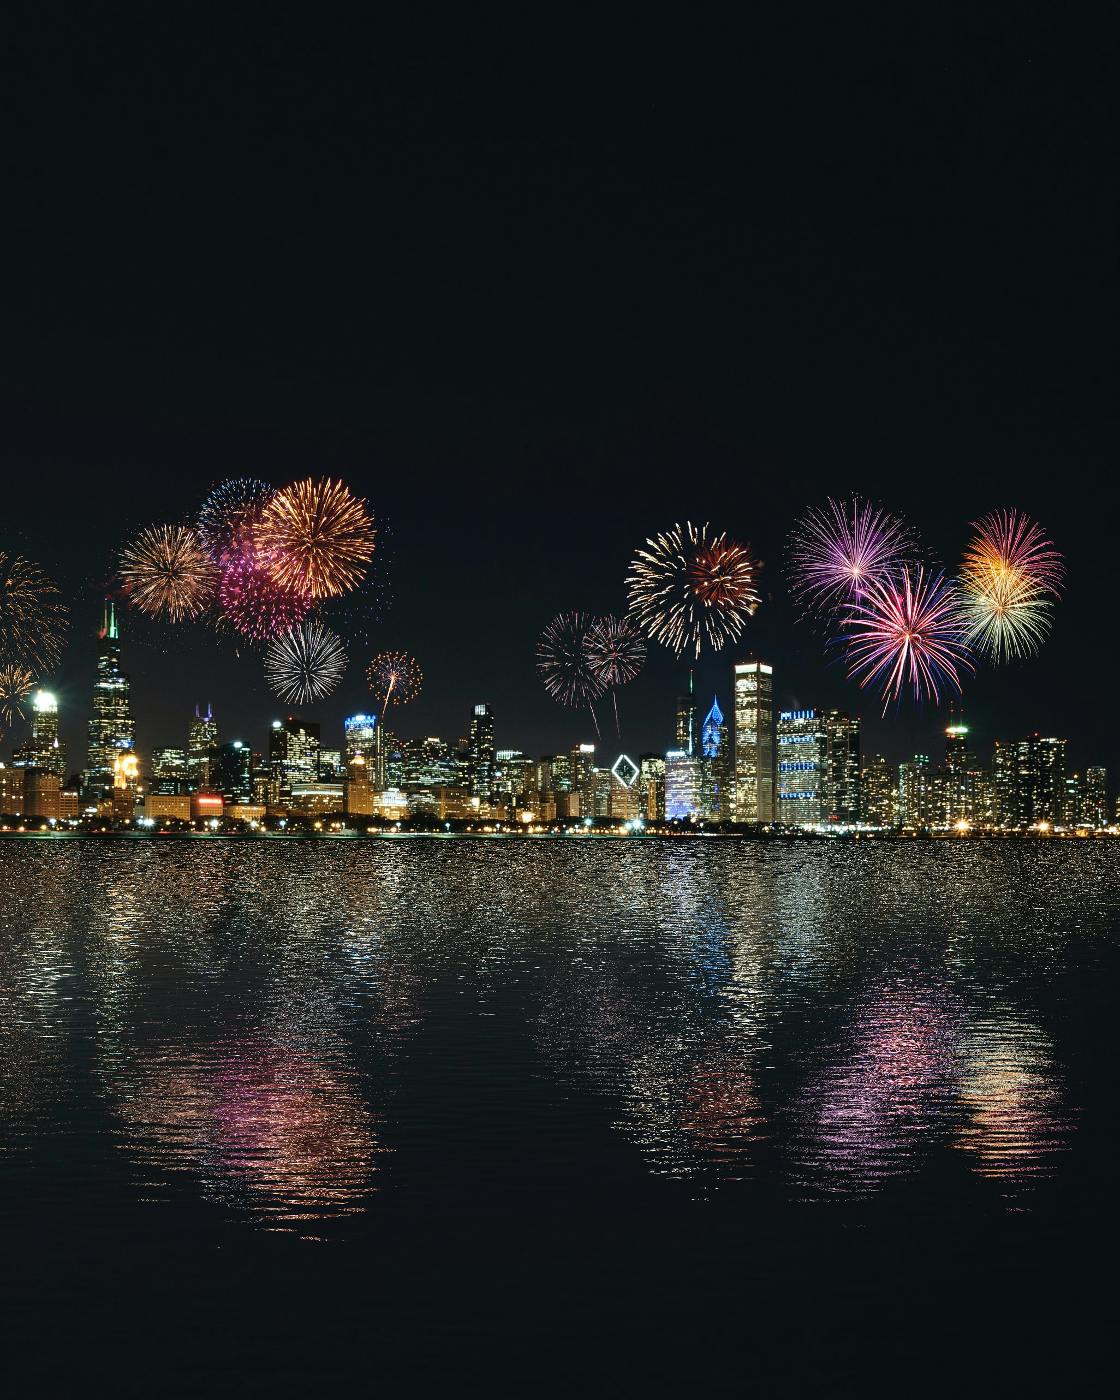 Fireworks over a city and harbor